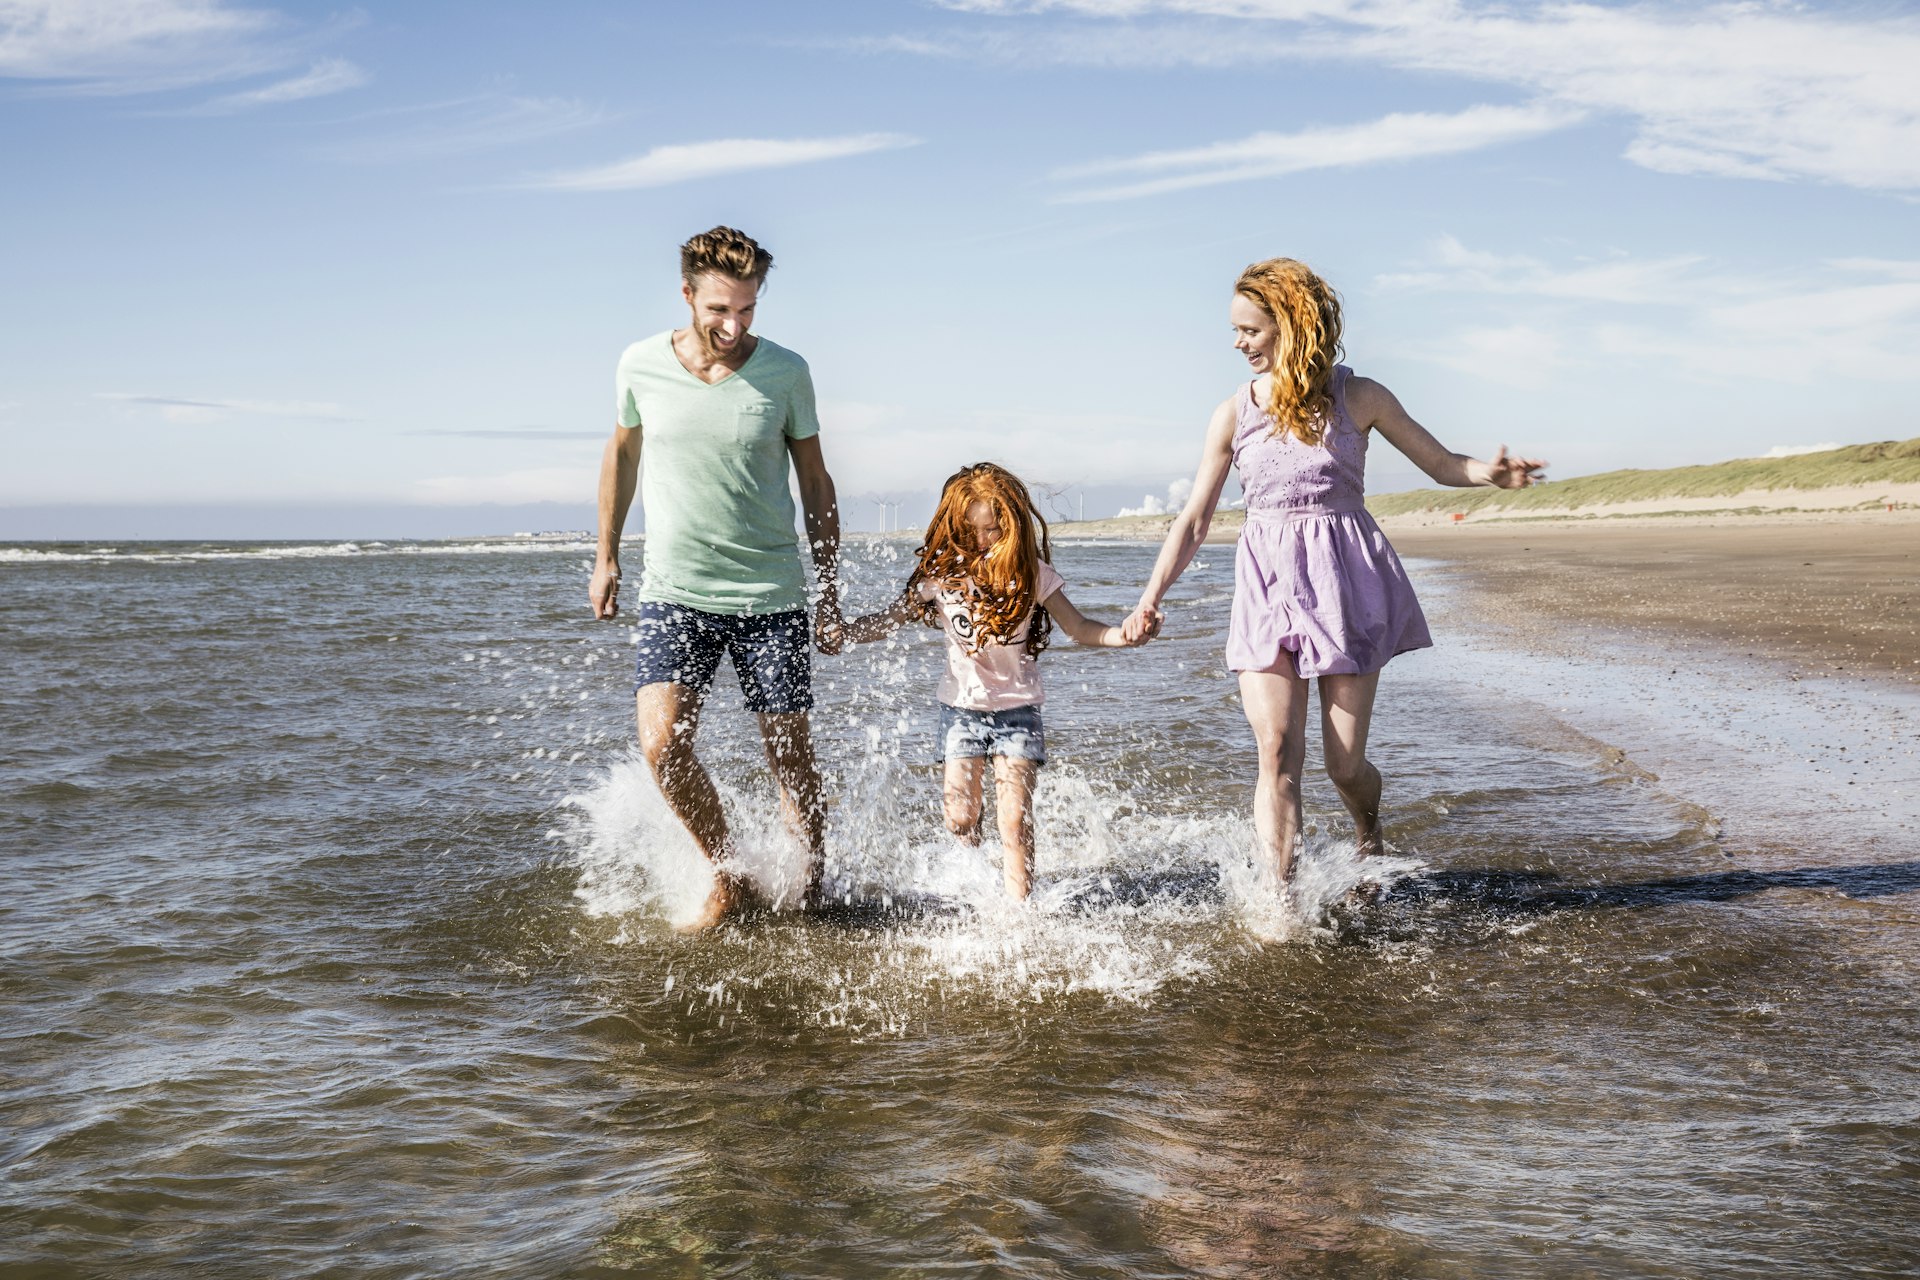 A family of three splash through the shallows of the sea on a day at the beach